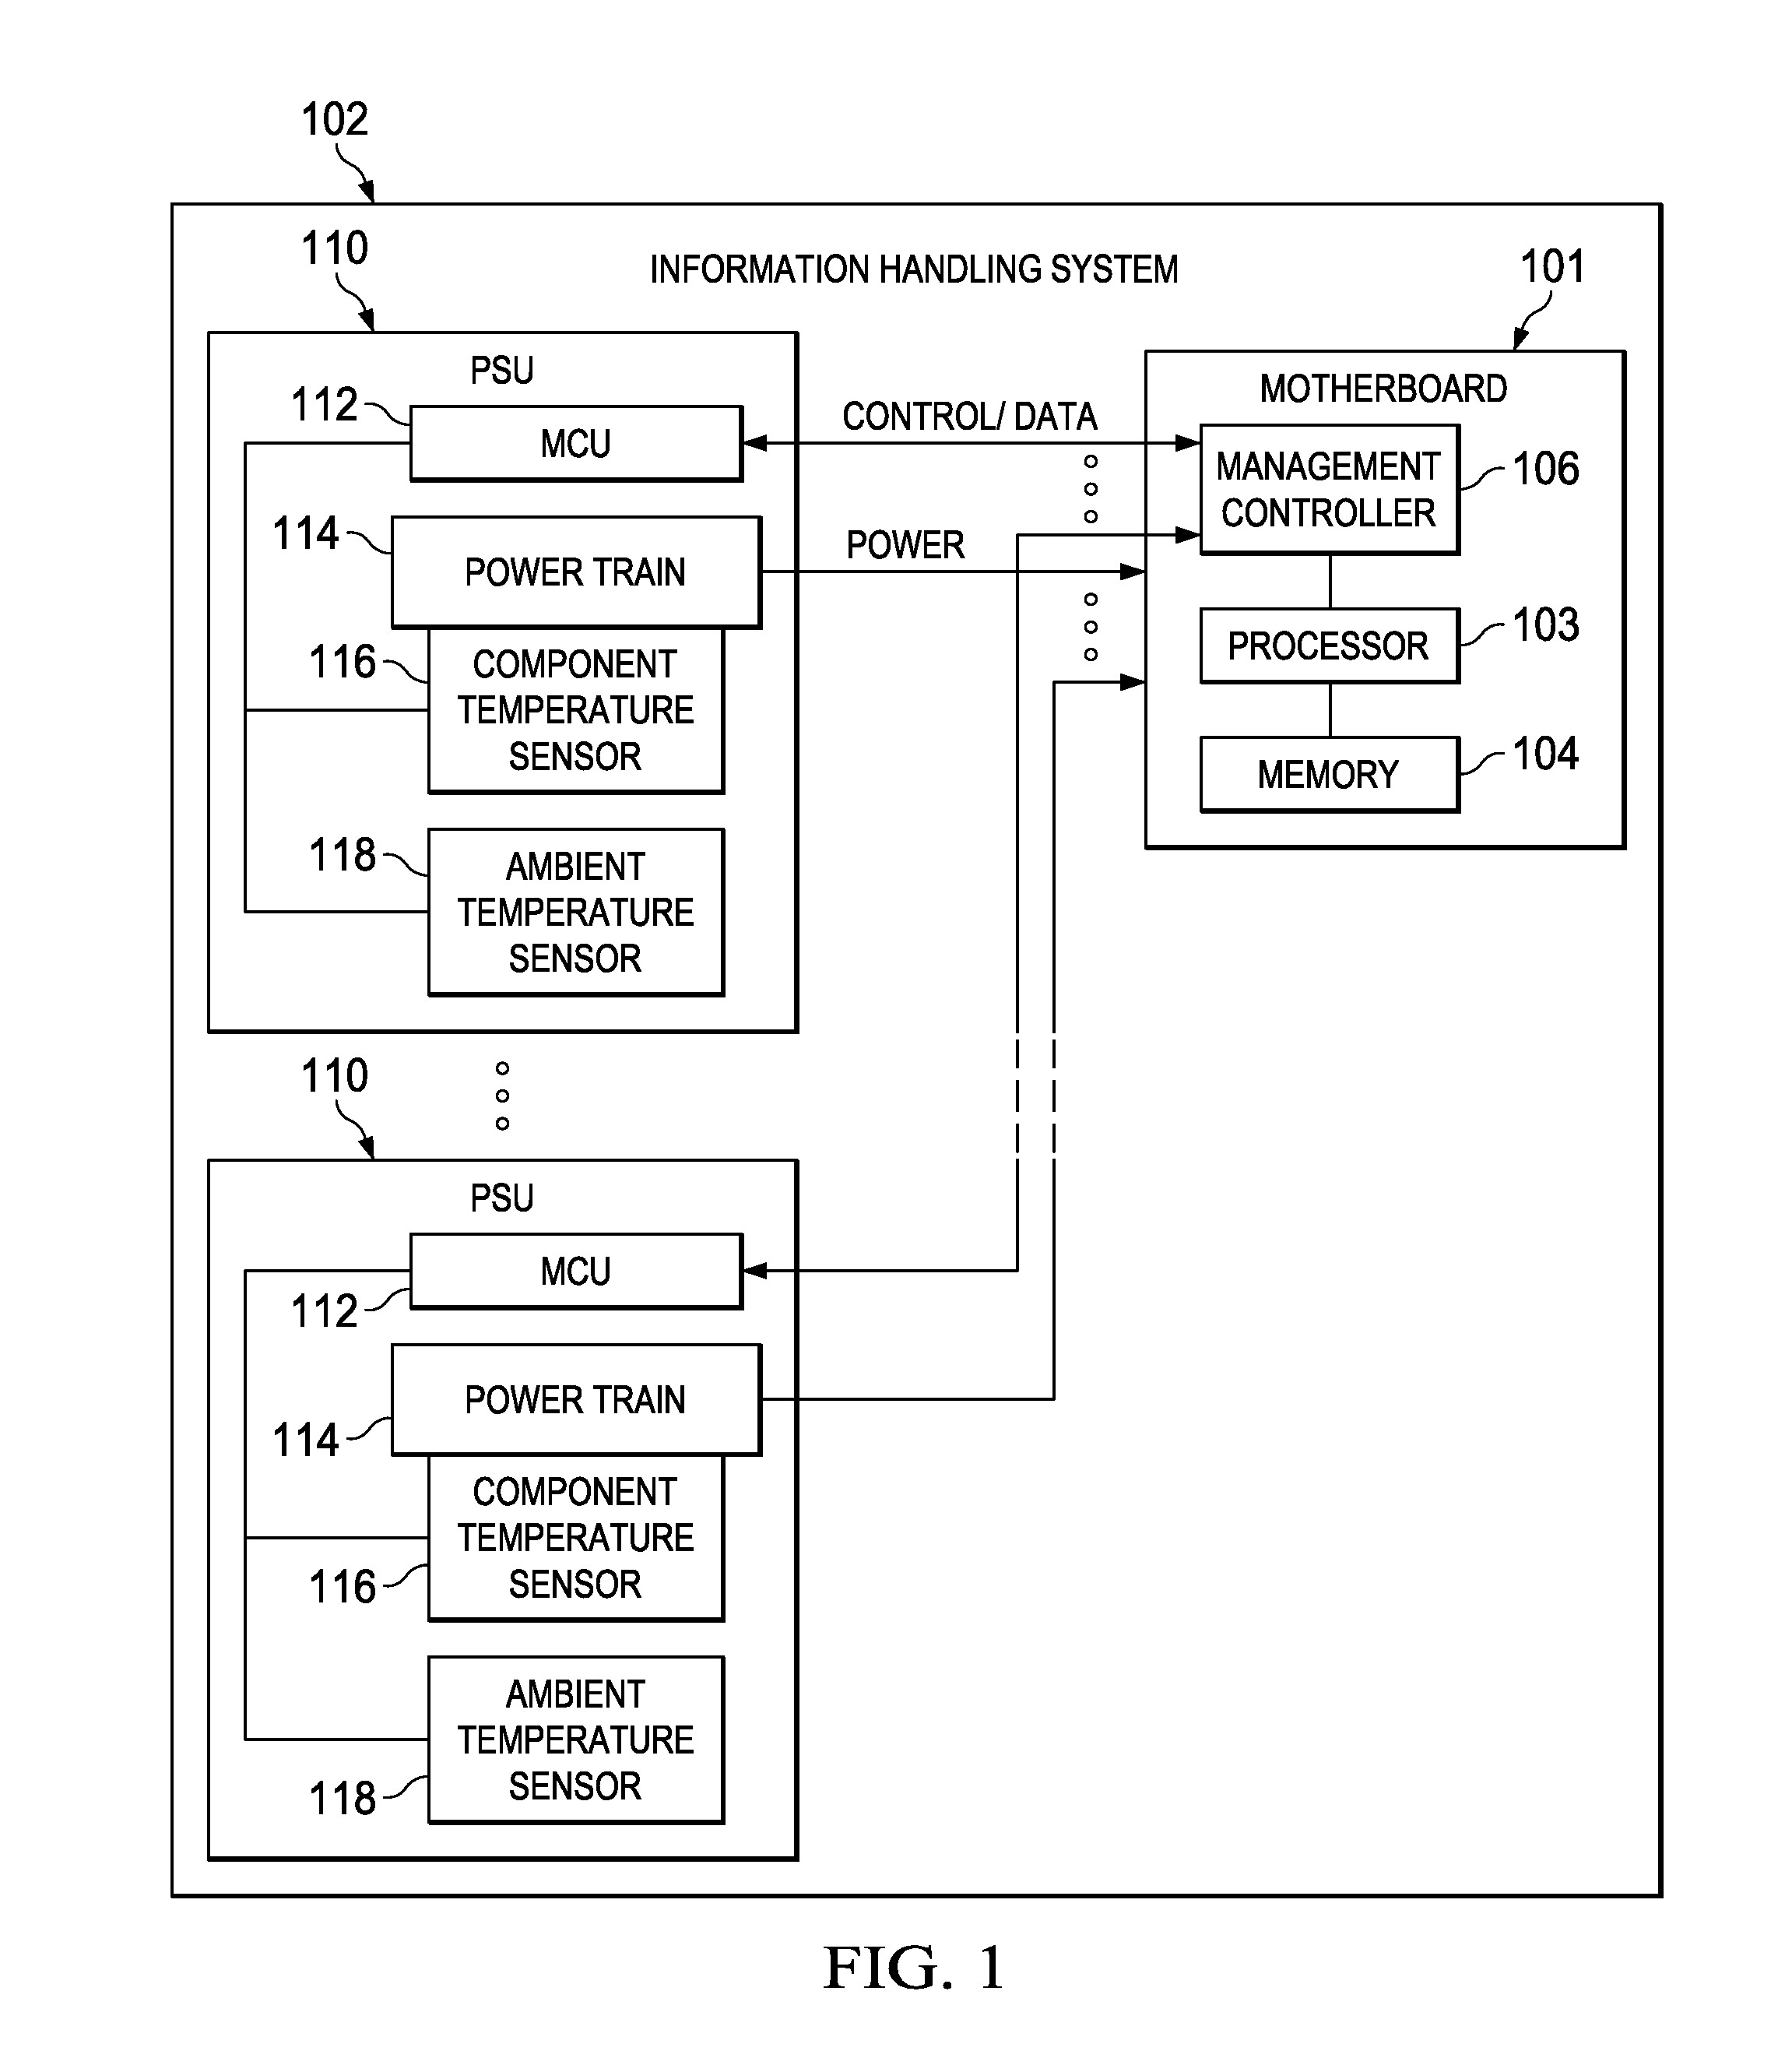 Systems and methods for non-uniform power supply unit load sharing